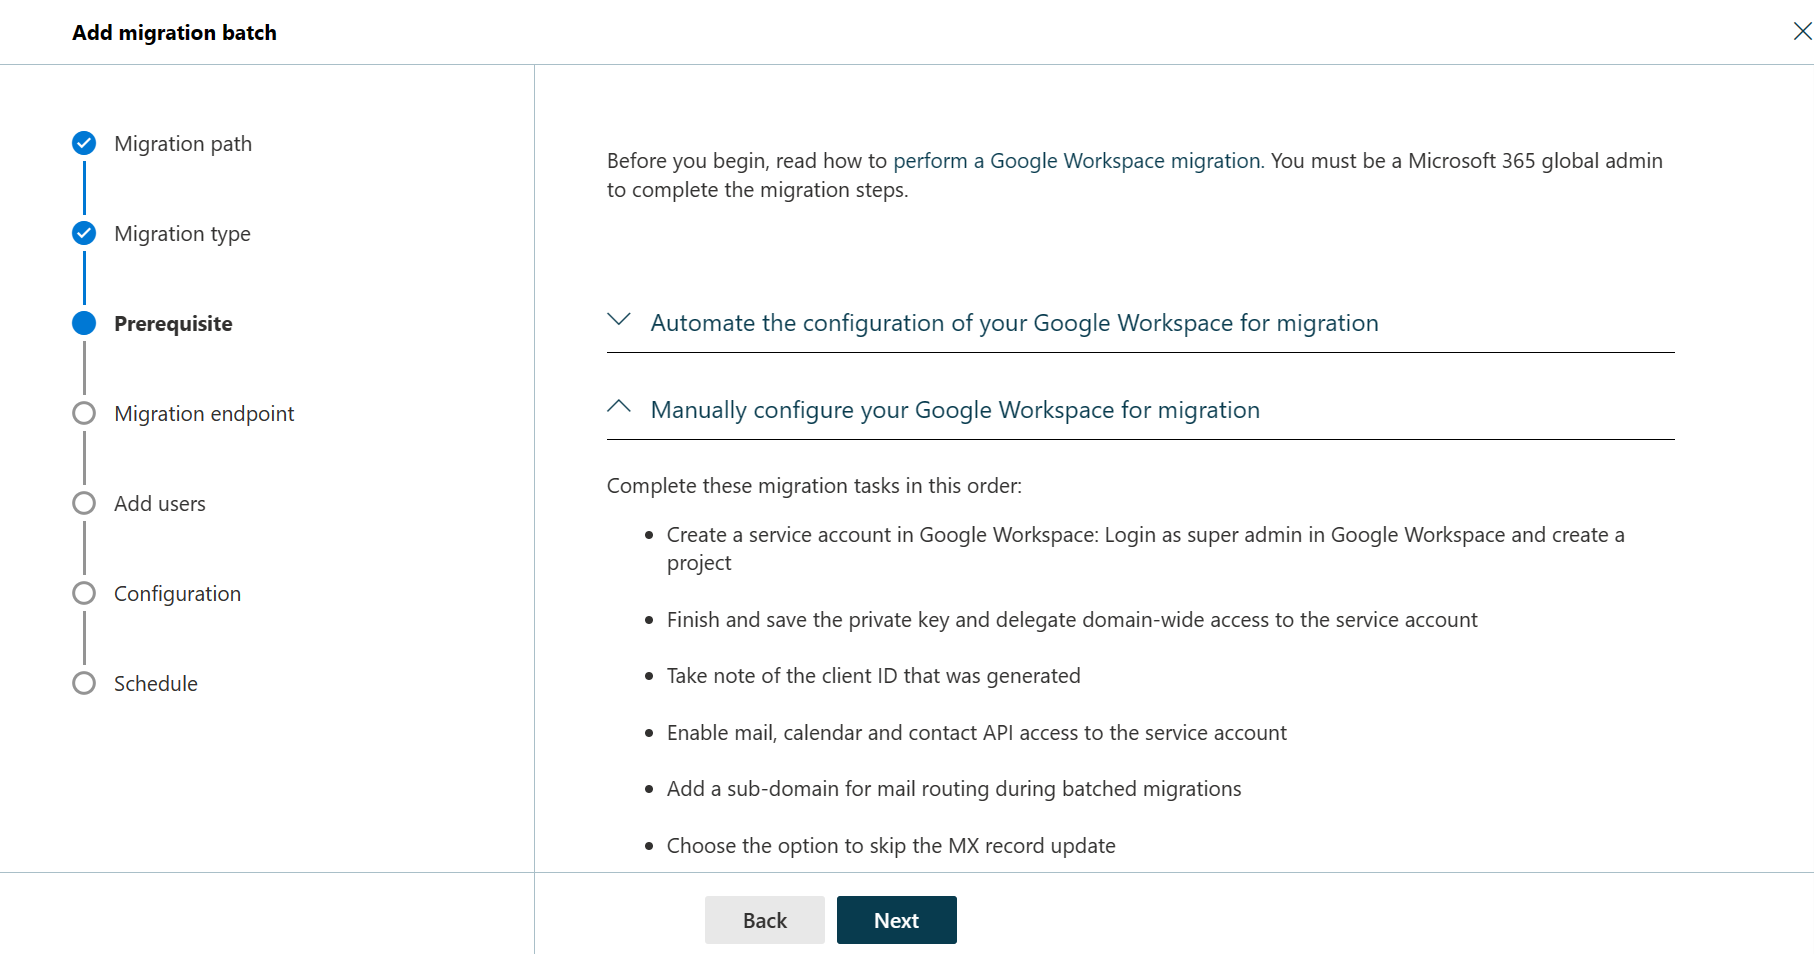 Screenshot of the third steps of the migration batch wizard where the manually configure Google workspace migration is selected.